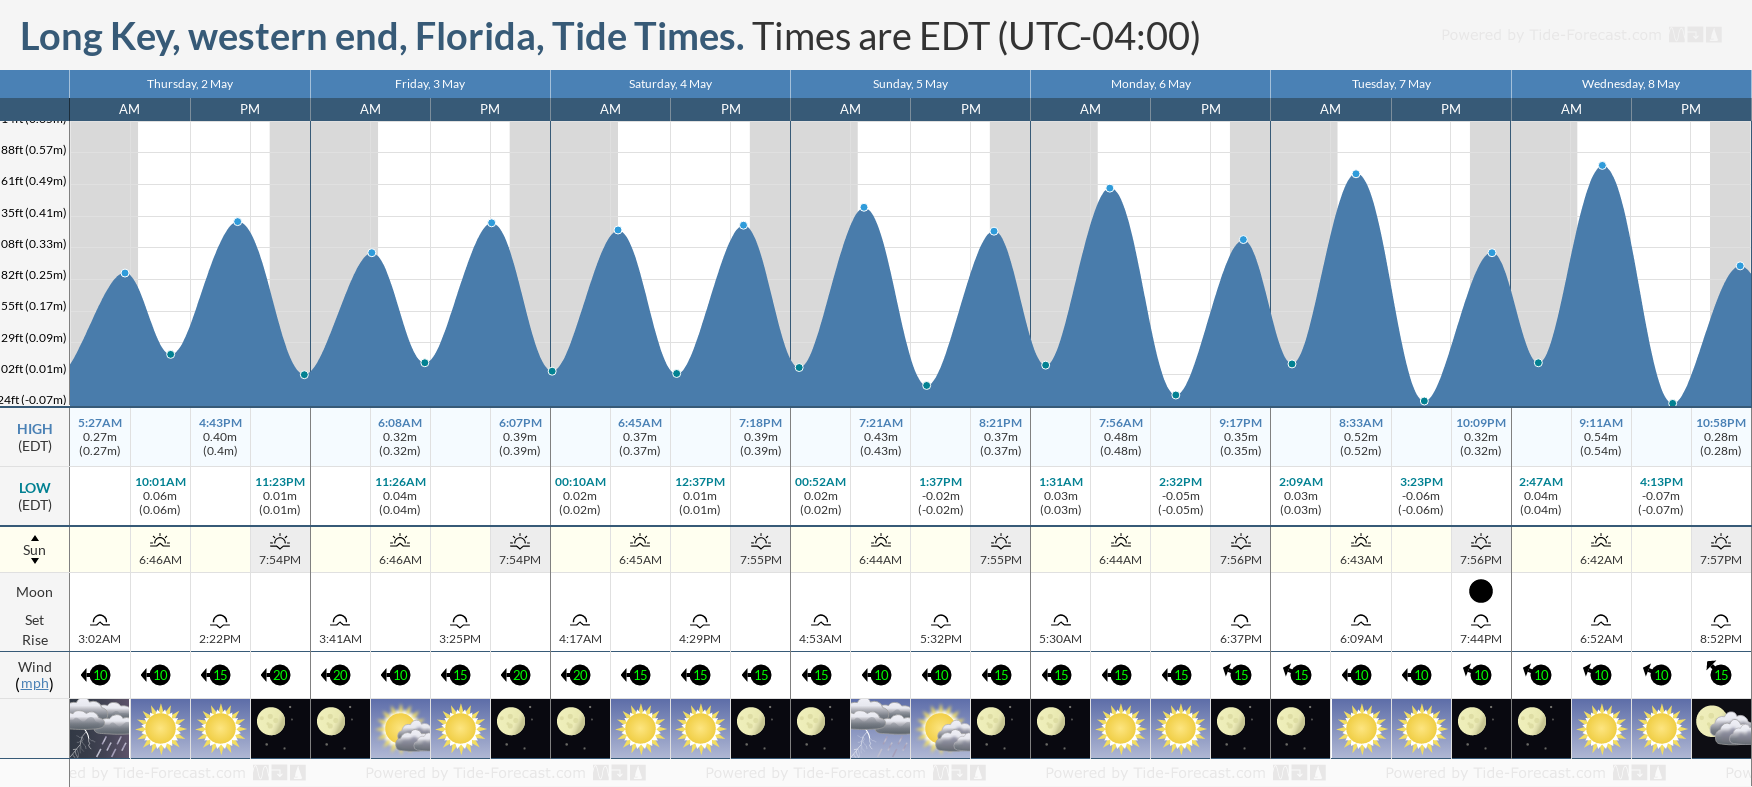 Long Key, western end, Florida Tide Chart including high and low tide times for the next 7 days